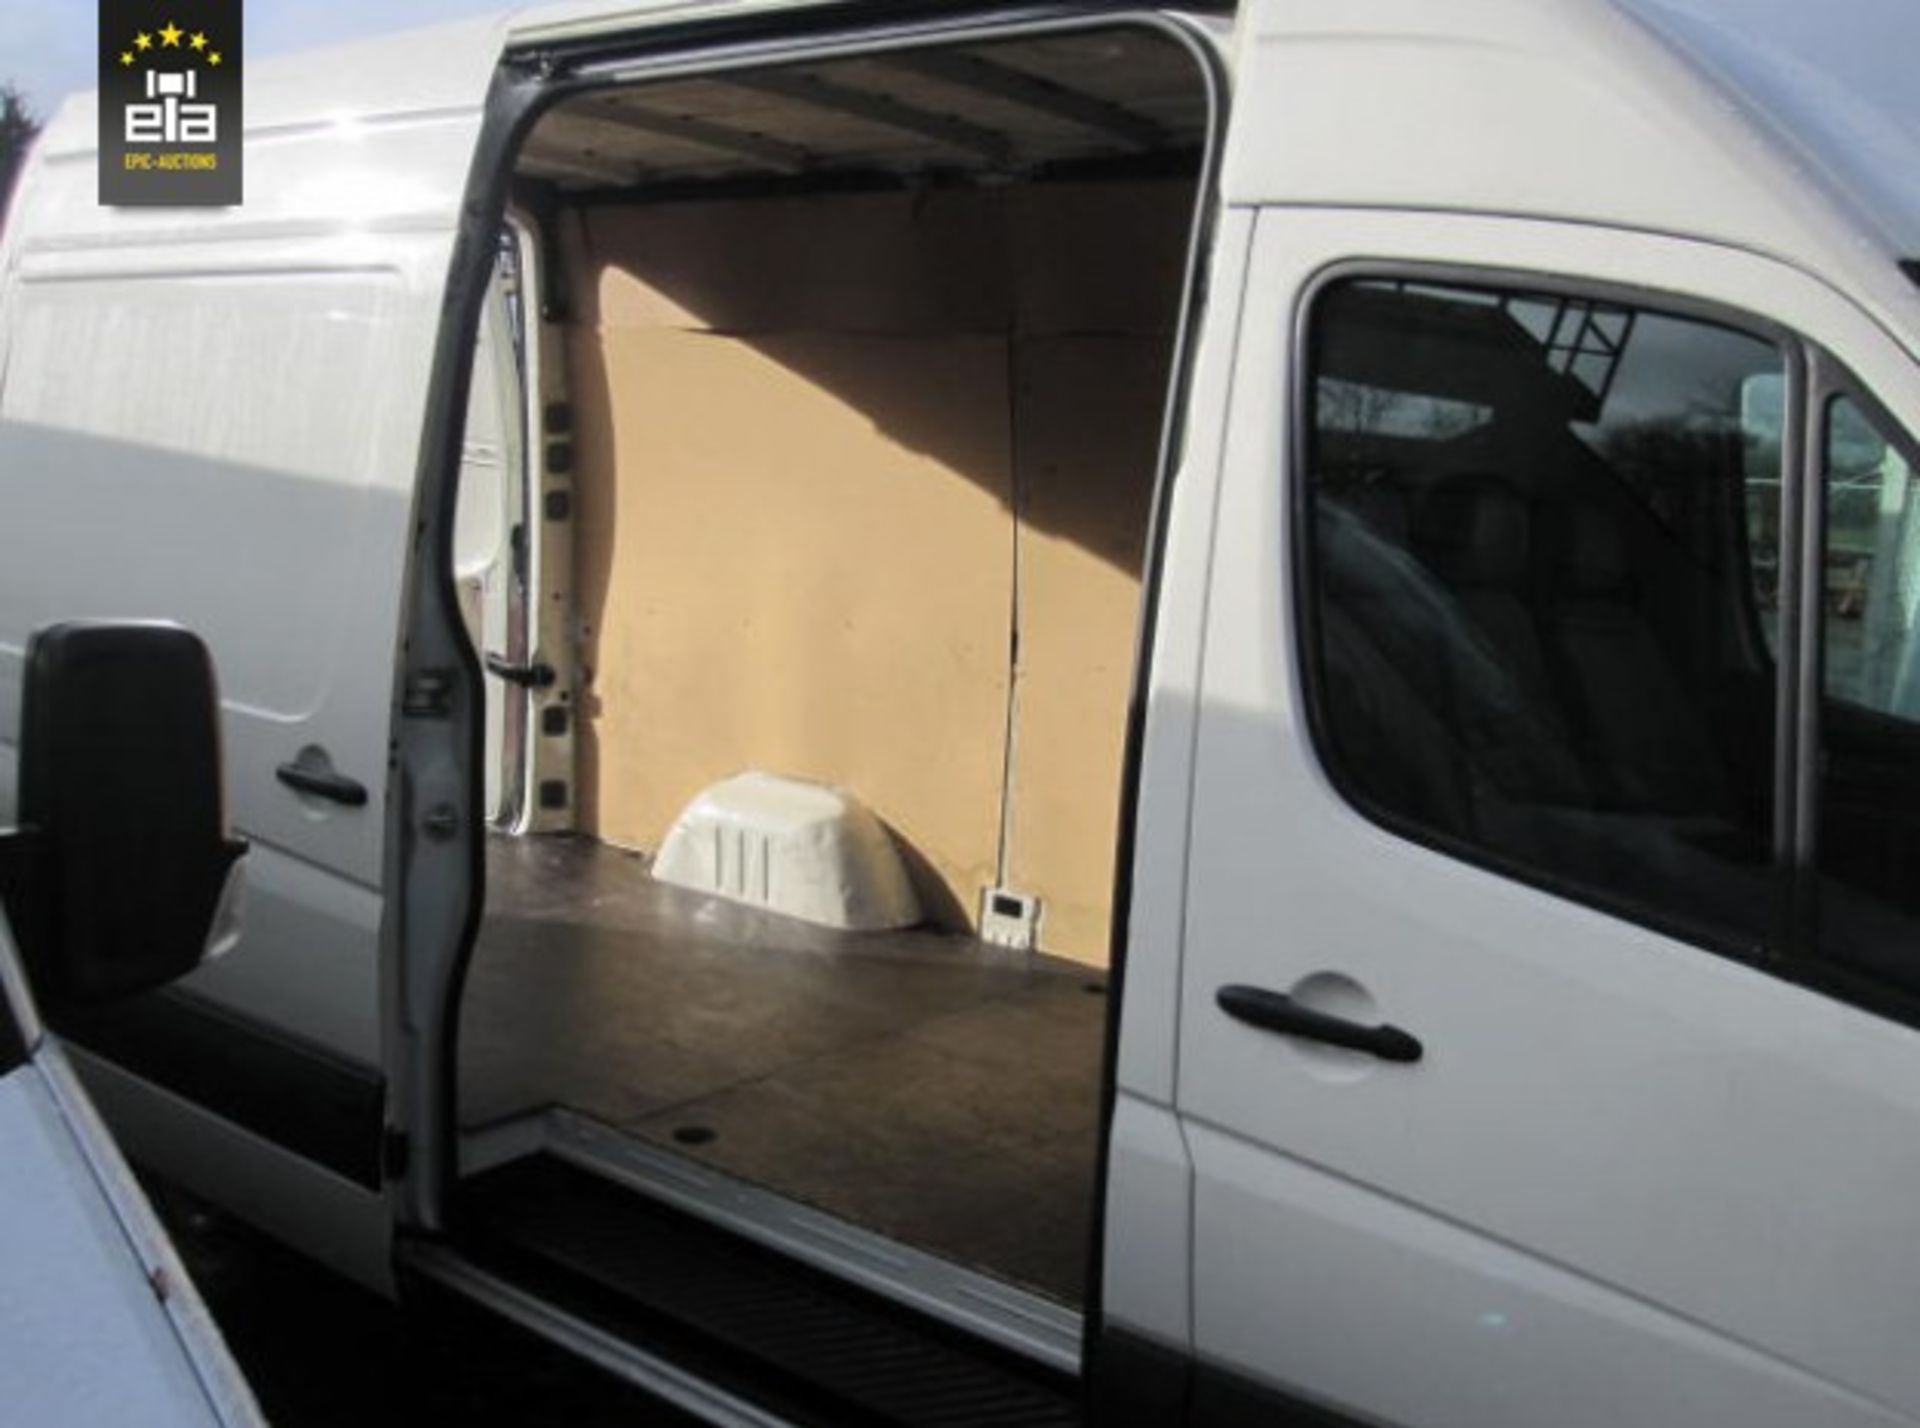 2011 Volkswagen Crafter 2.5 TDI L2H2 20151051 - Image 24 of 26